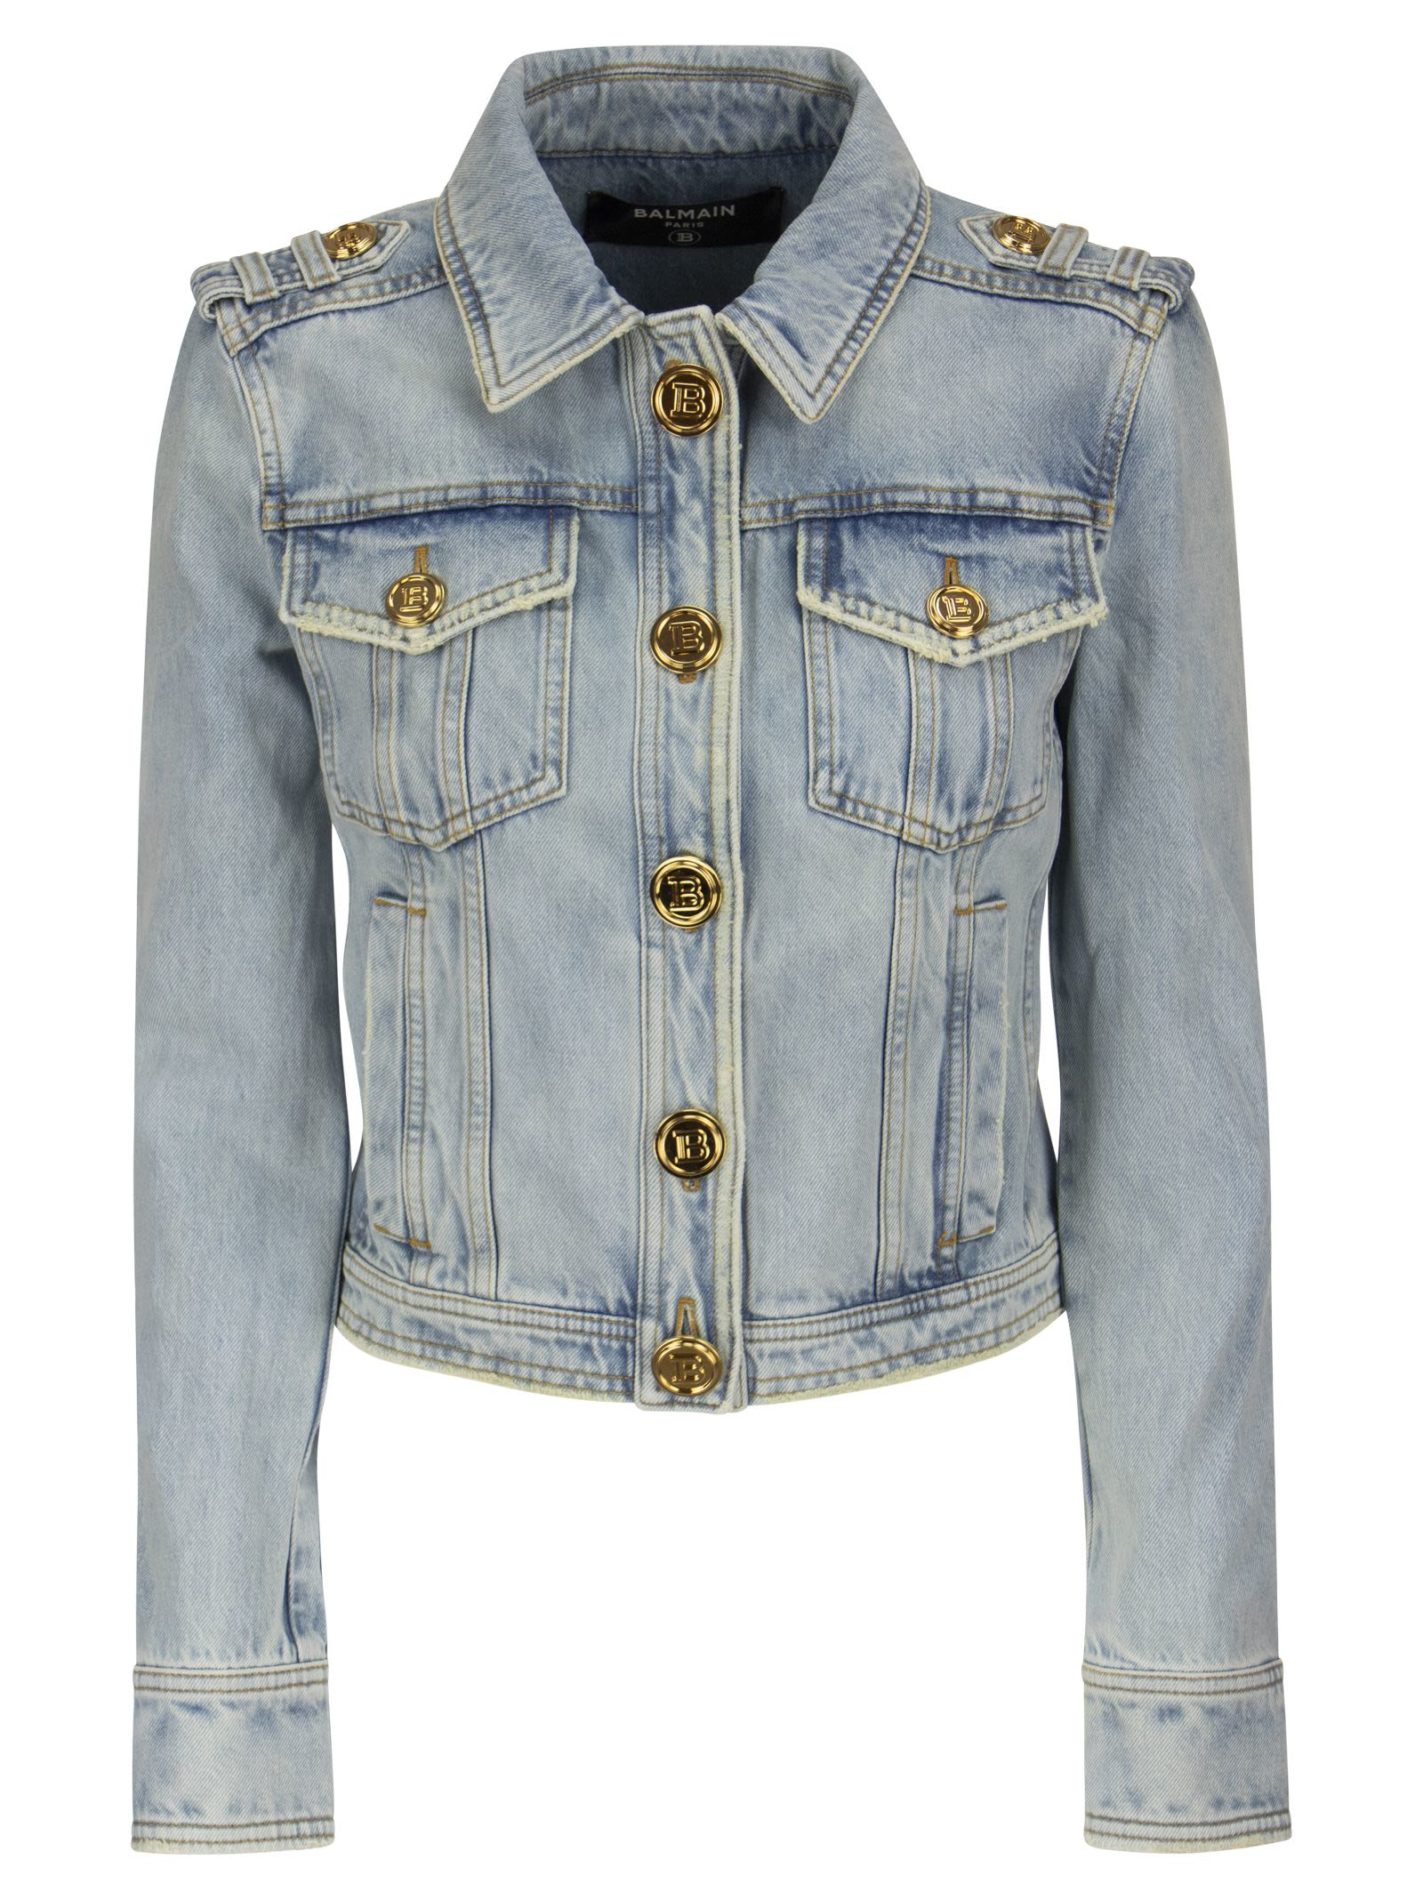 Denim jacket with gold buttons - Bellettini.com